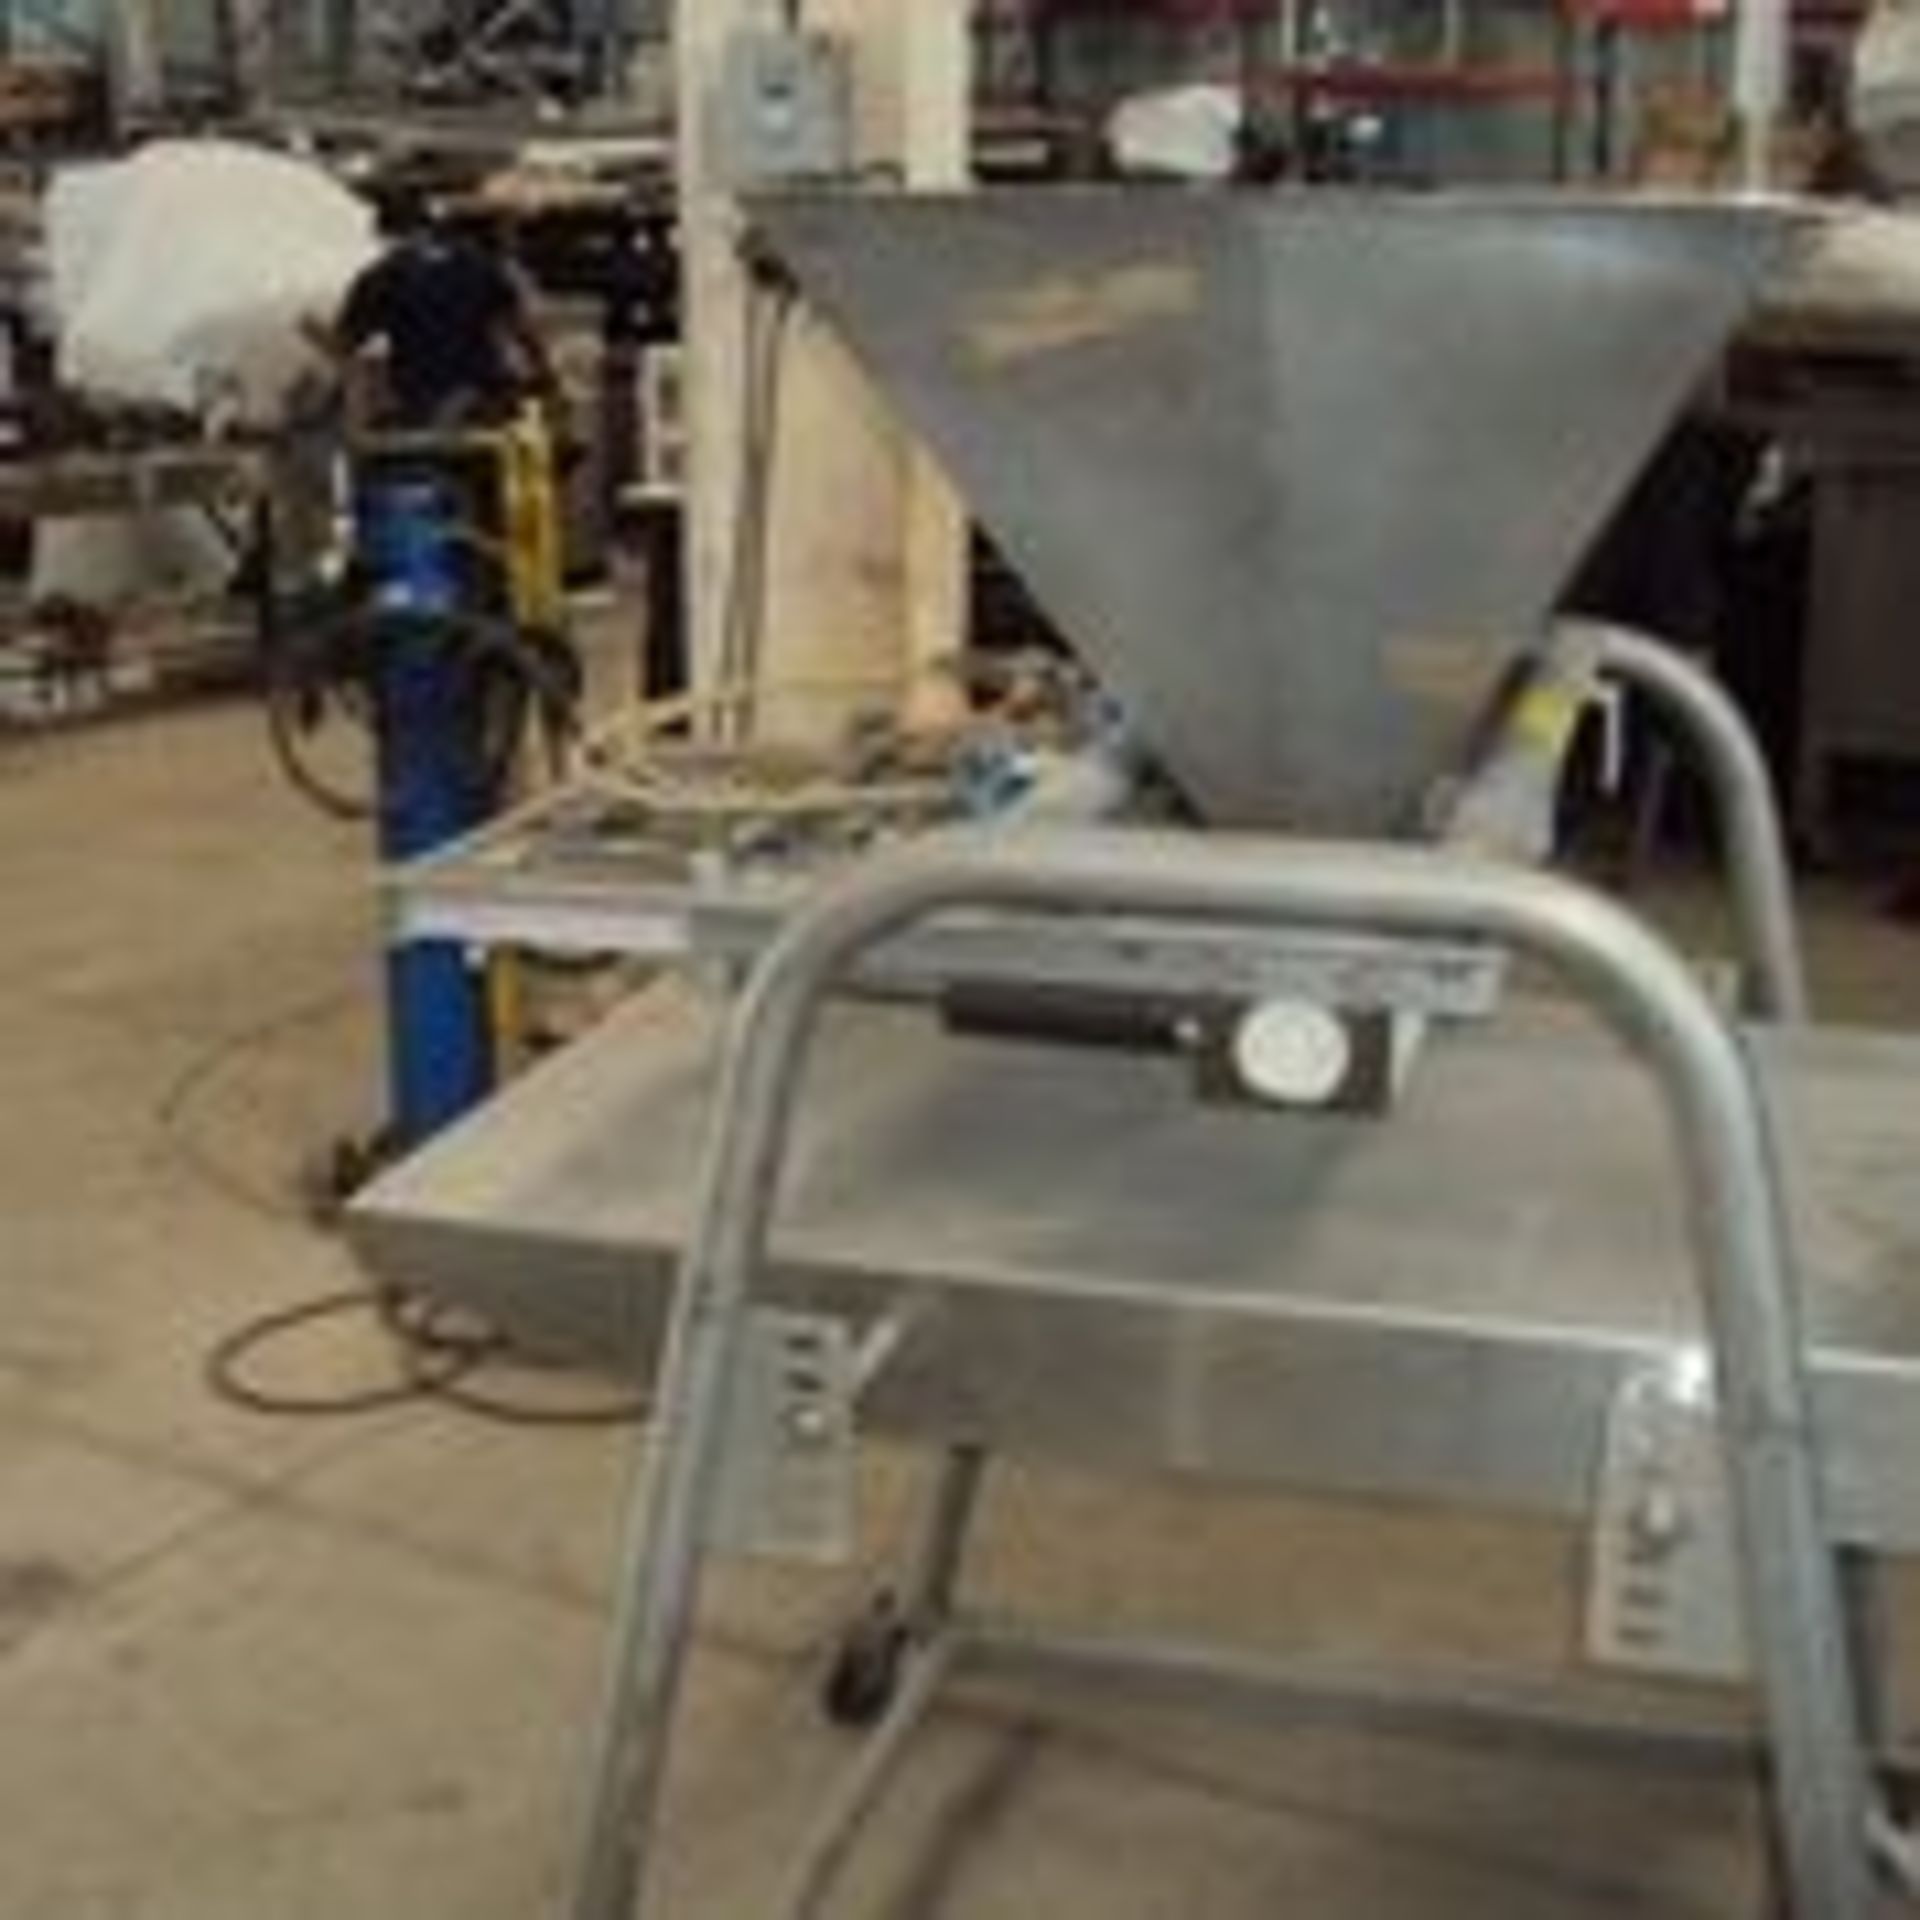 Hindsbock Muffin Depositor, Model: 41-18, Serial #: Serial: 1750, USDA, AG Canada, and CFIA approved - Image 9 of 11